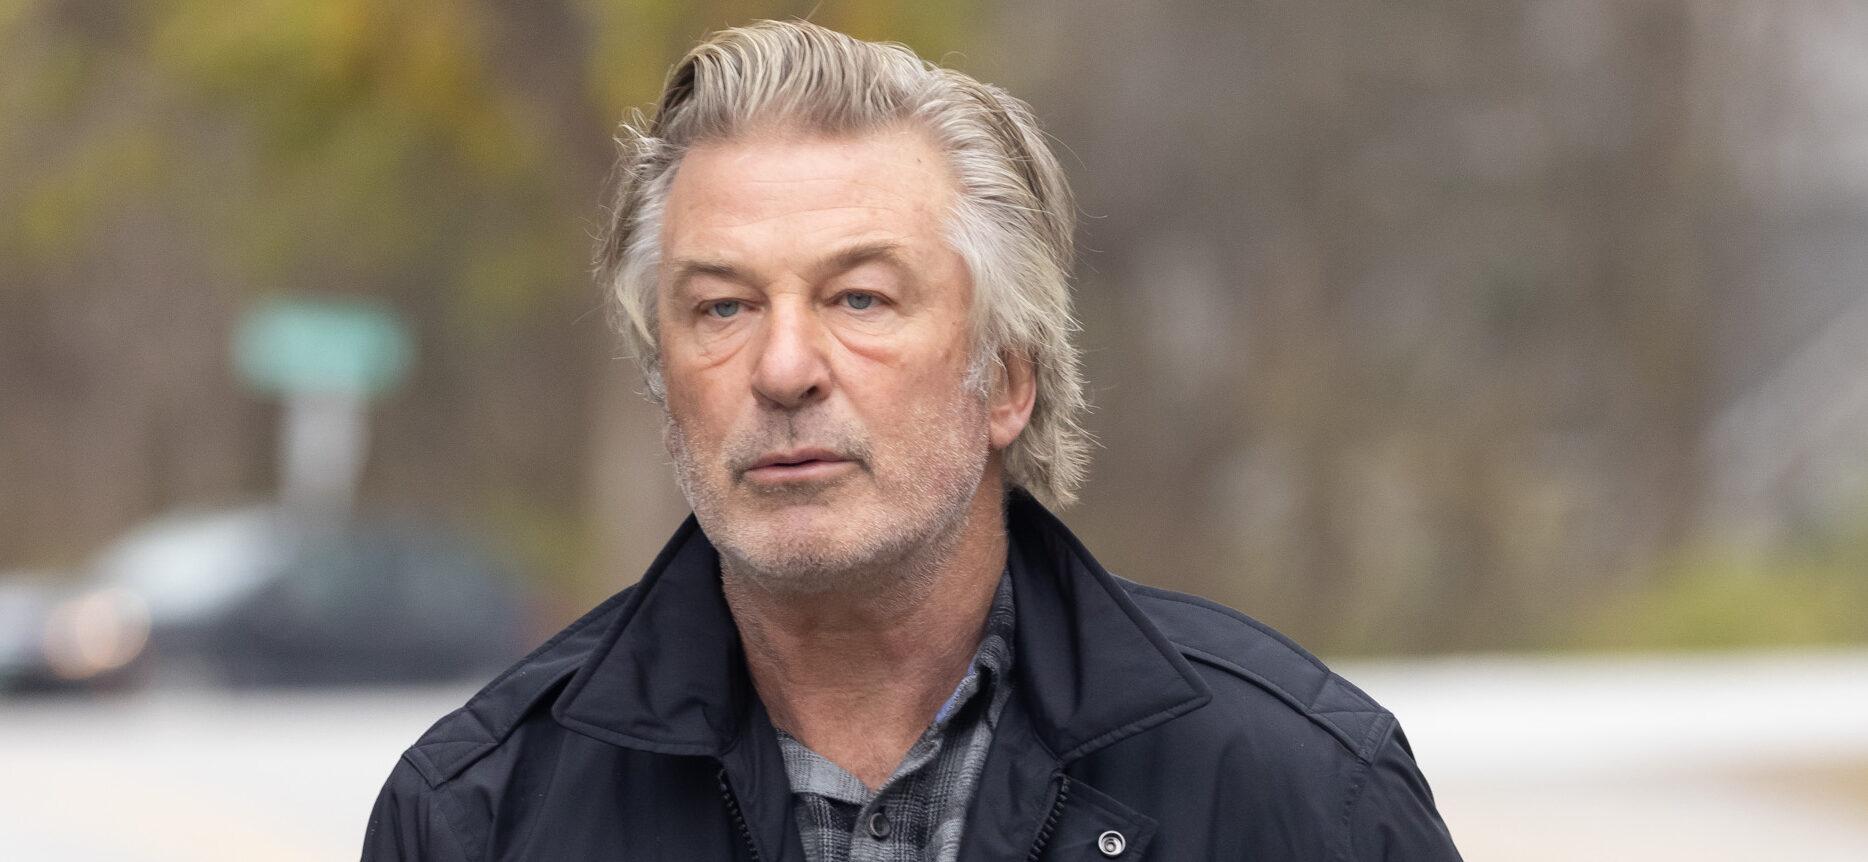 Alec Baldwin Spends Time With His Sons Following ‘Rust’ Filming